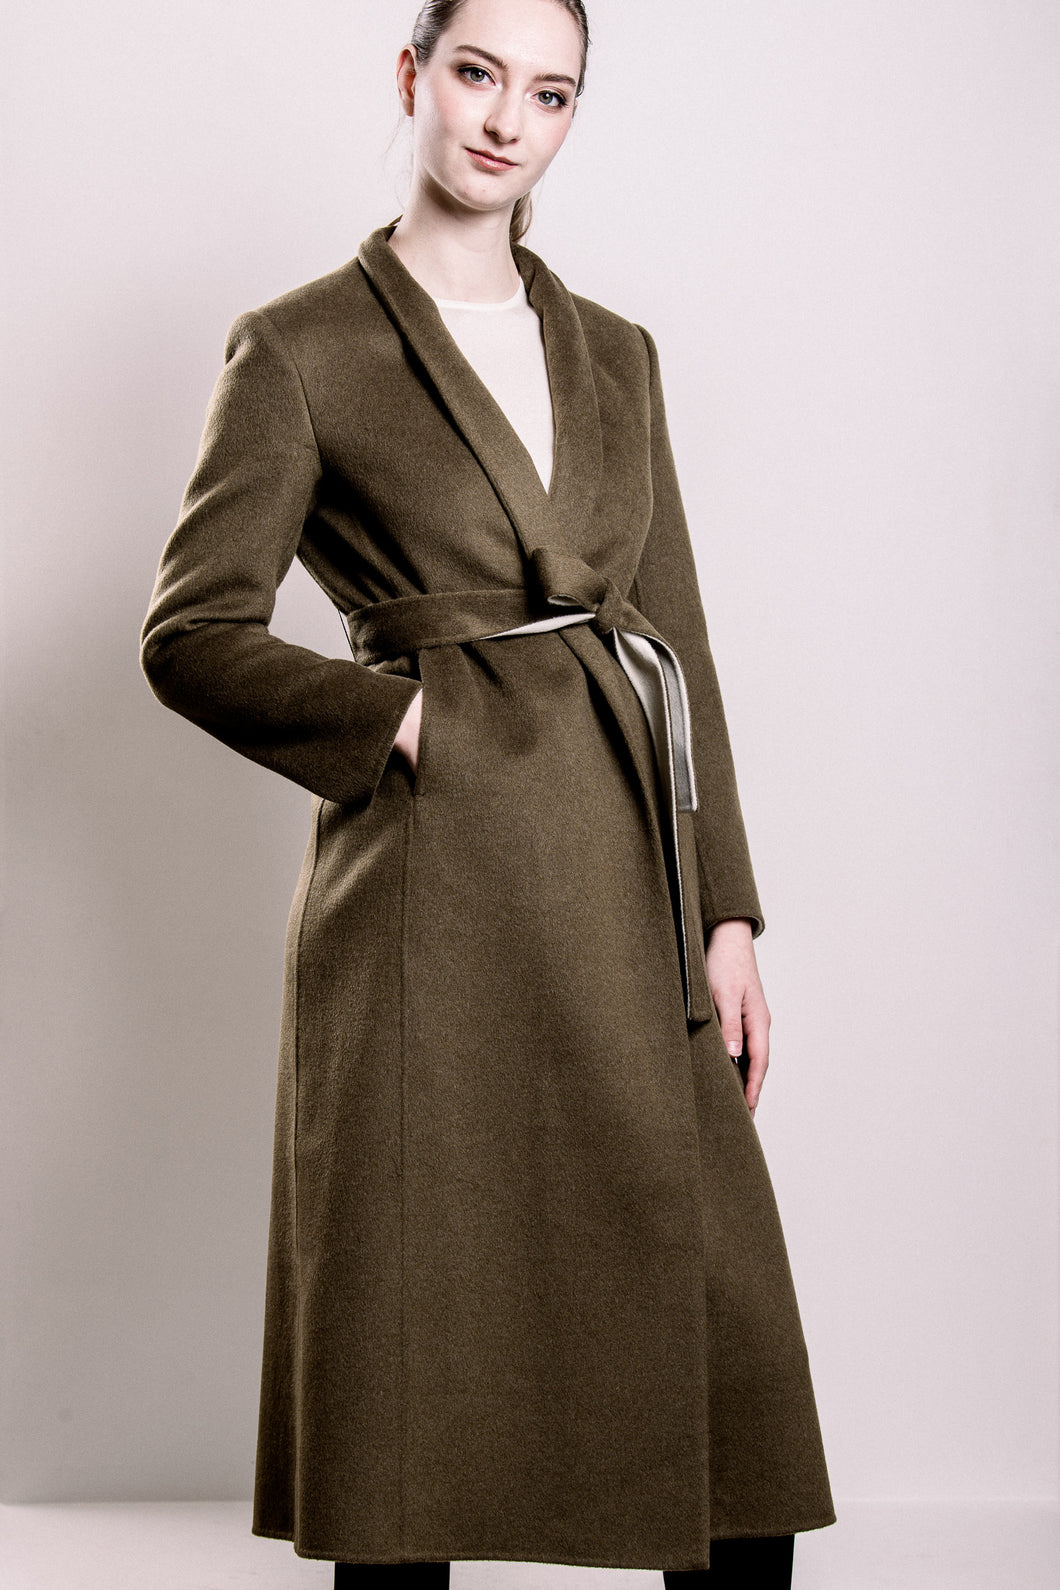 Demi-Couture Wool & Silk Overcoat - Olive